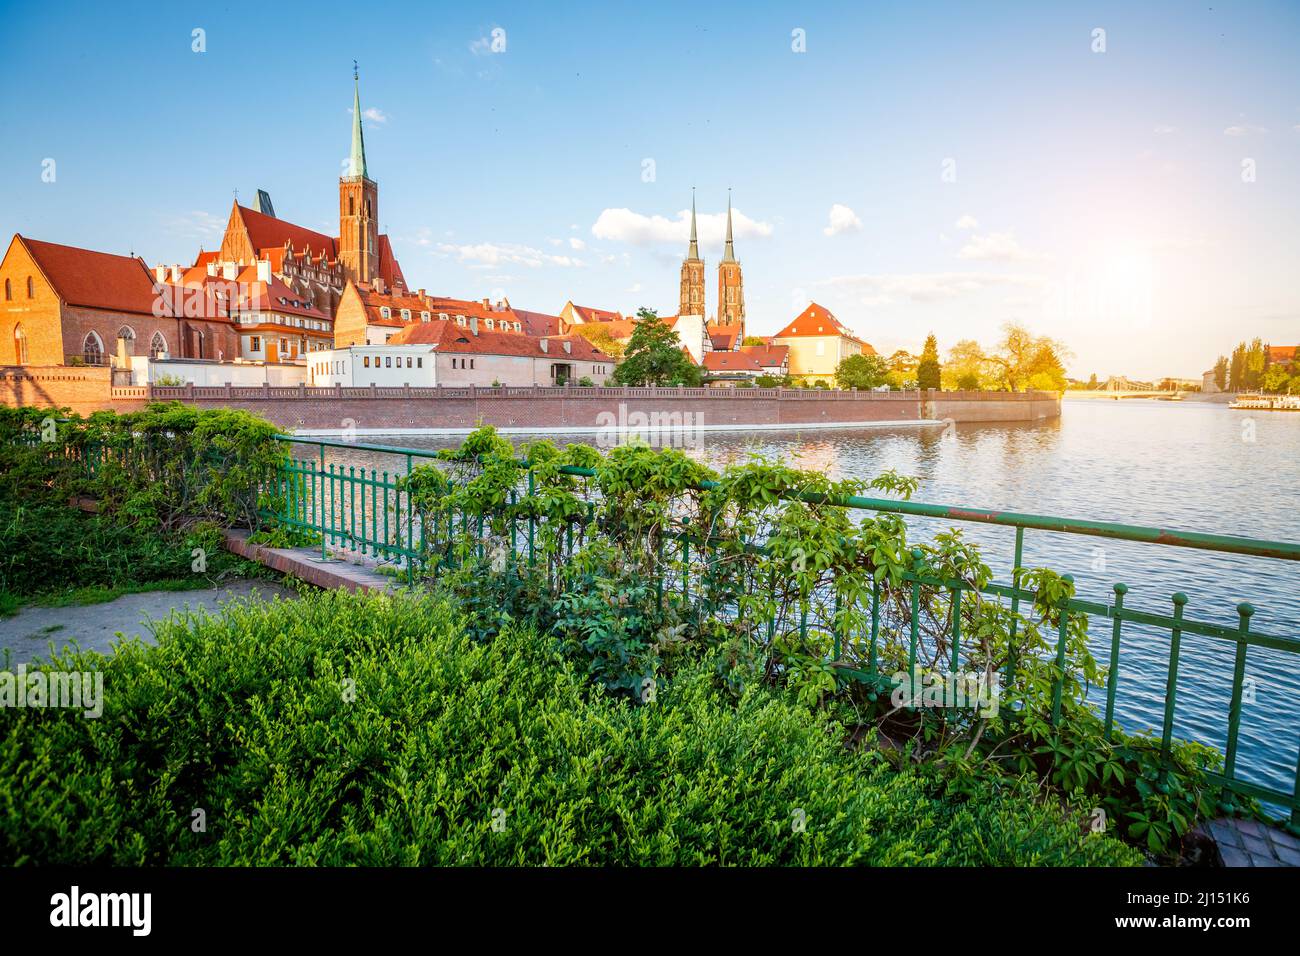 View of the ancient city Wroclaw. Picturesque scene. Location famous place Cathedral of St. John the Baptist Tumski island, Odra river, Poland, Europe Stock Photo